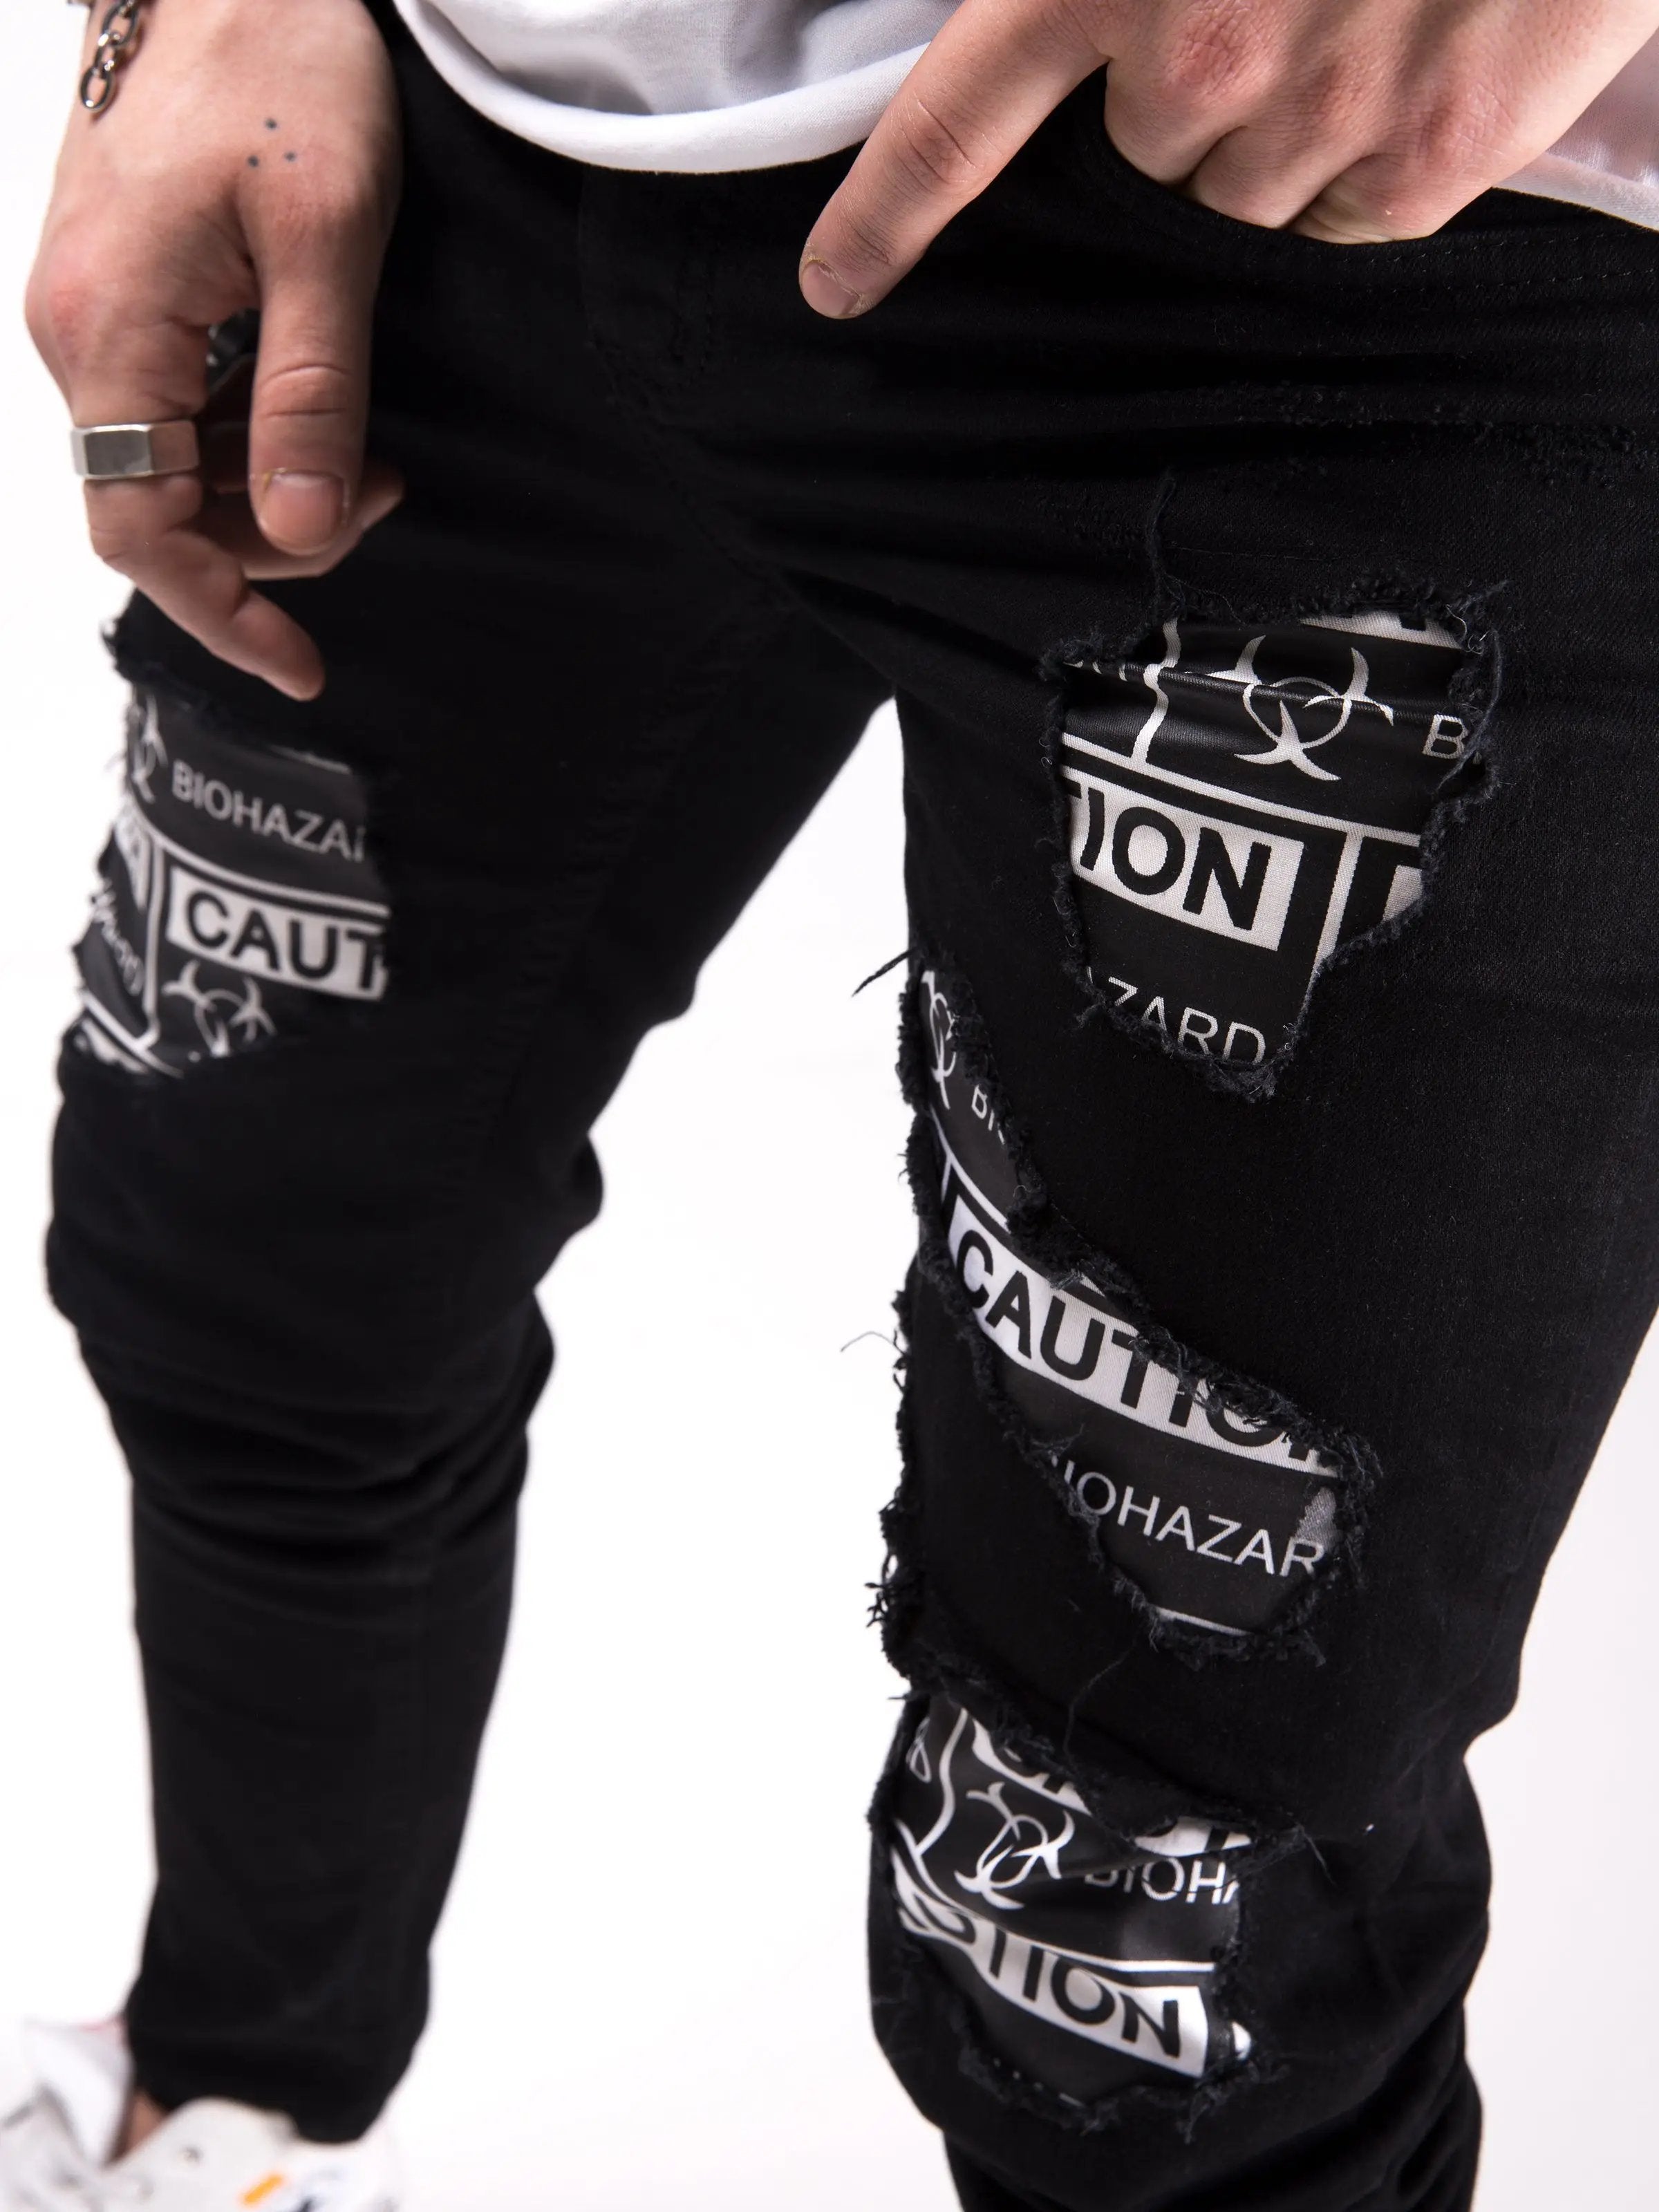 A man wearing a pair of BLACKOUT BIOHAZARD jeans with a message on them.